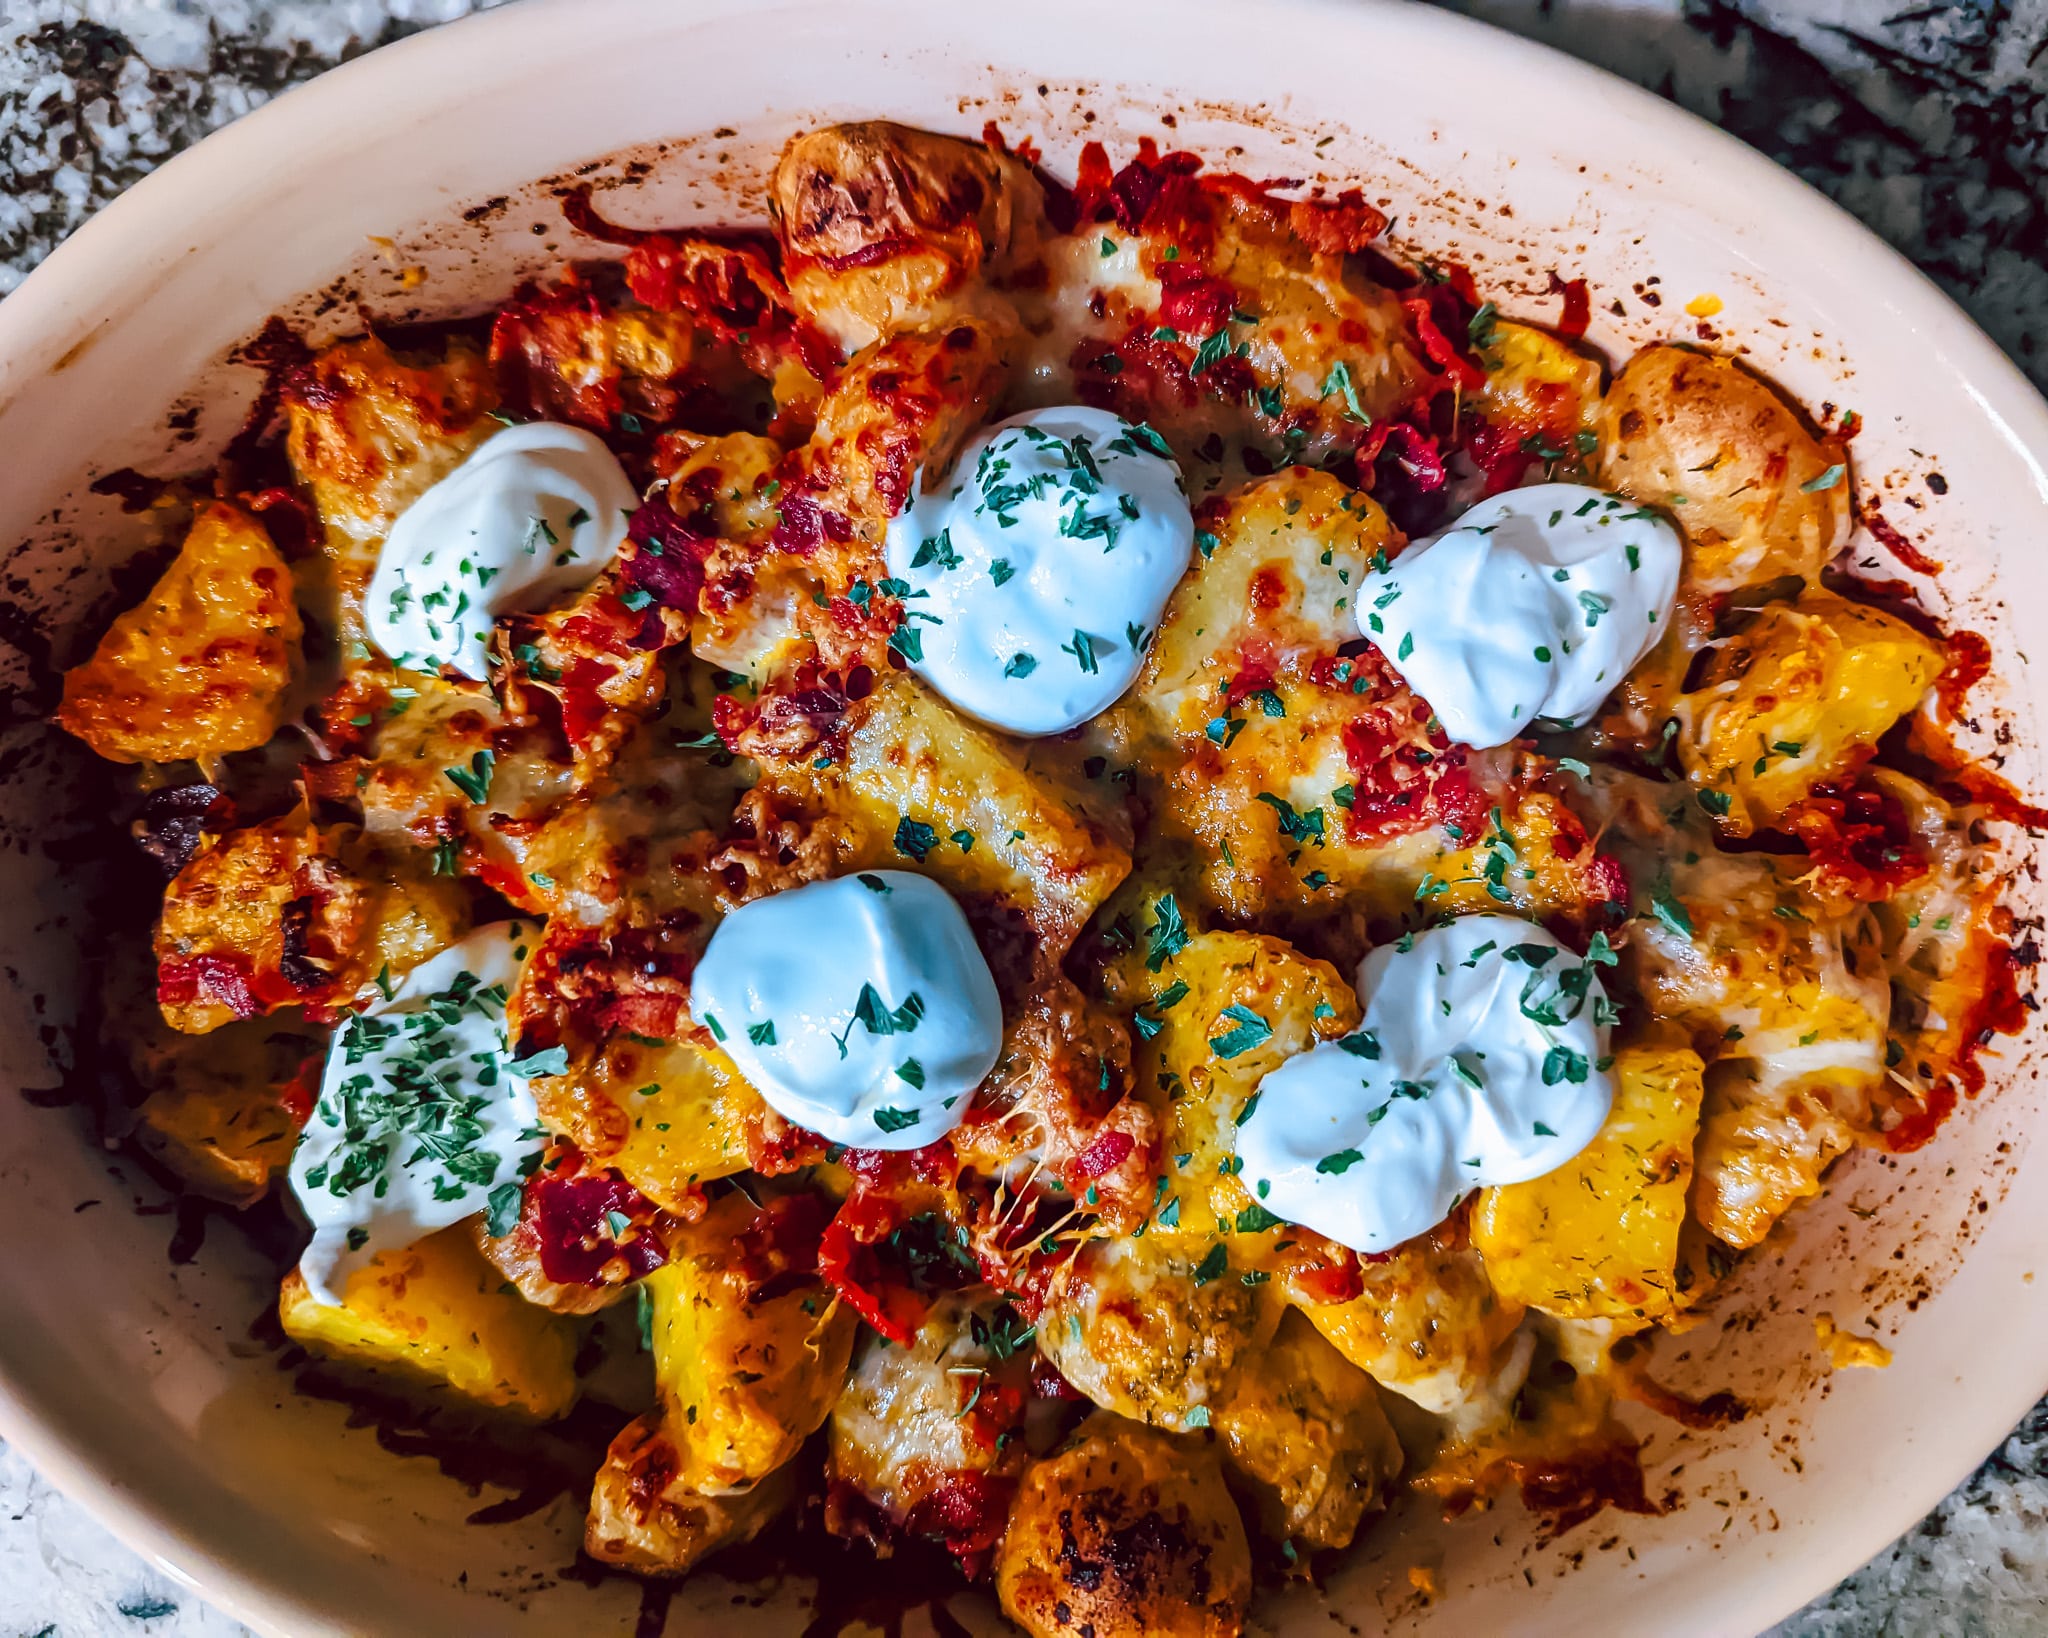 Over view of loaded ranch potatoes. Full of cheese and spices.